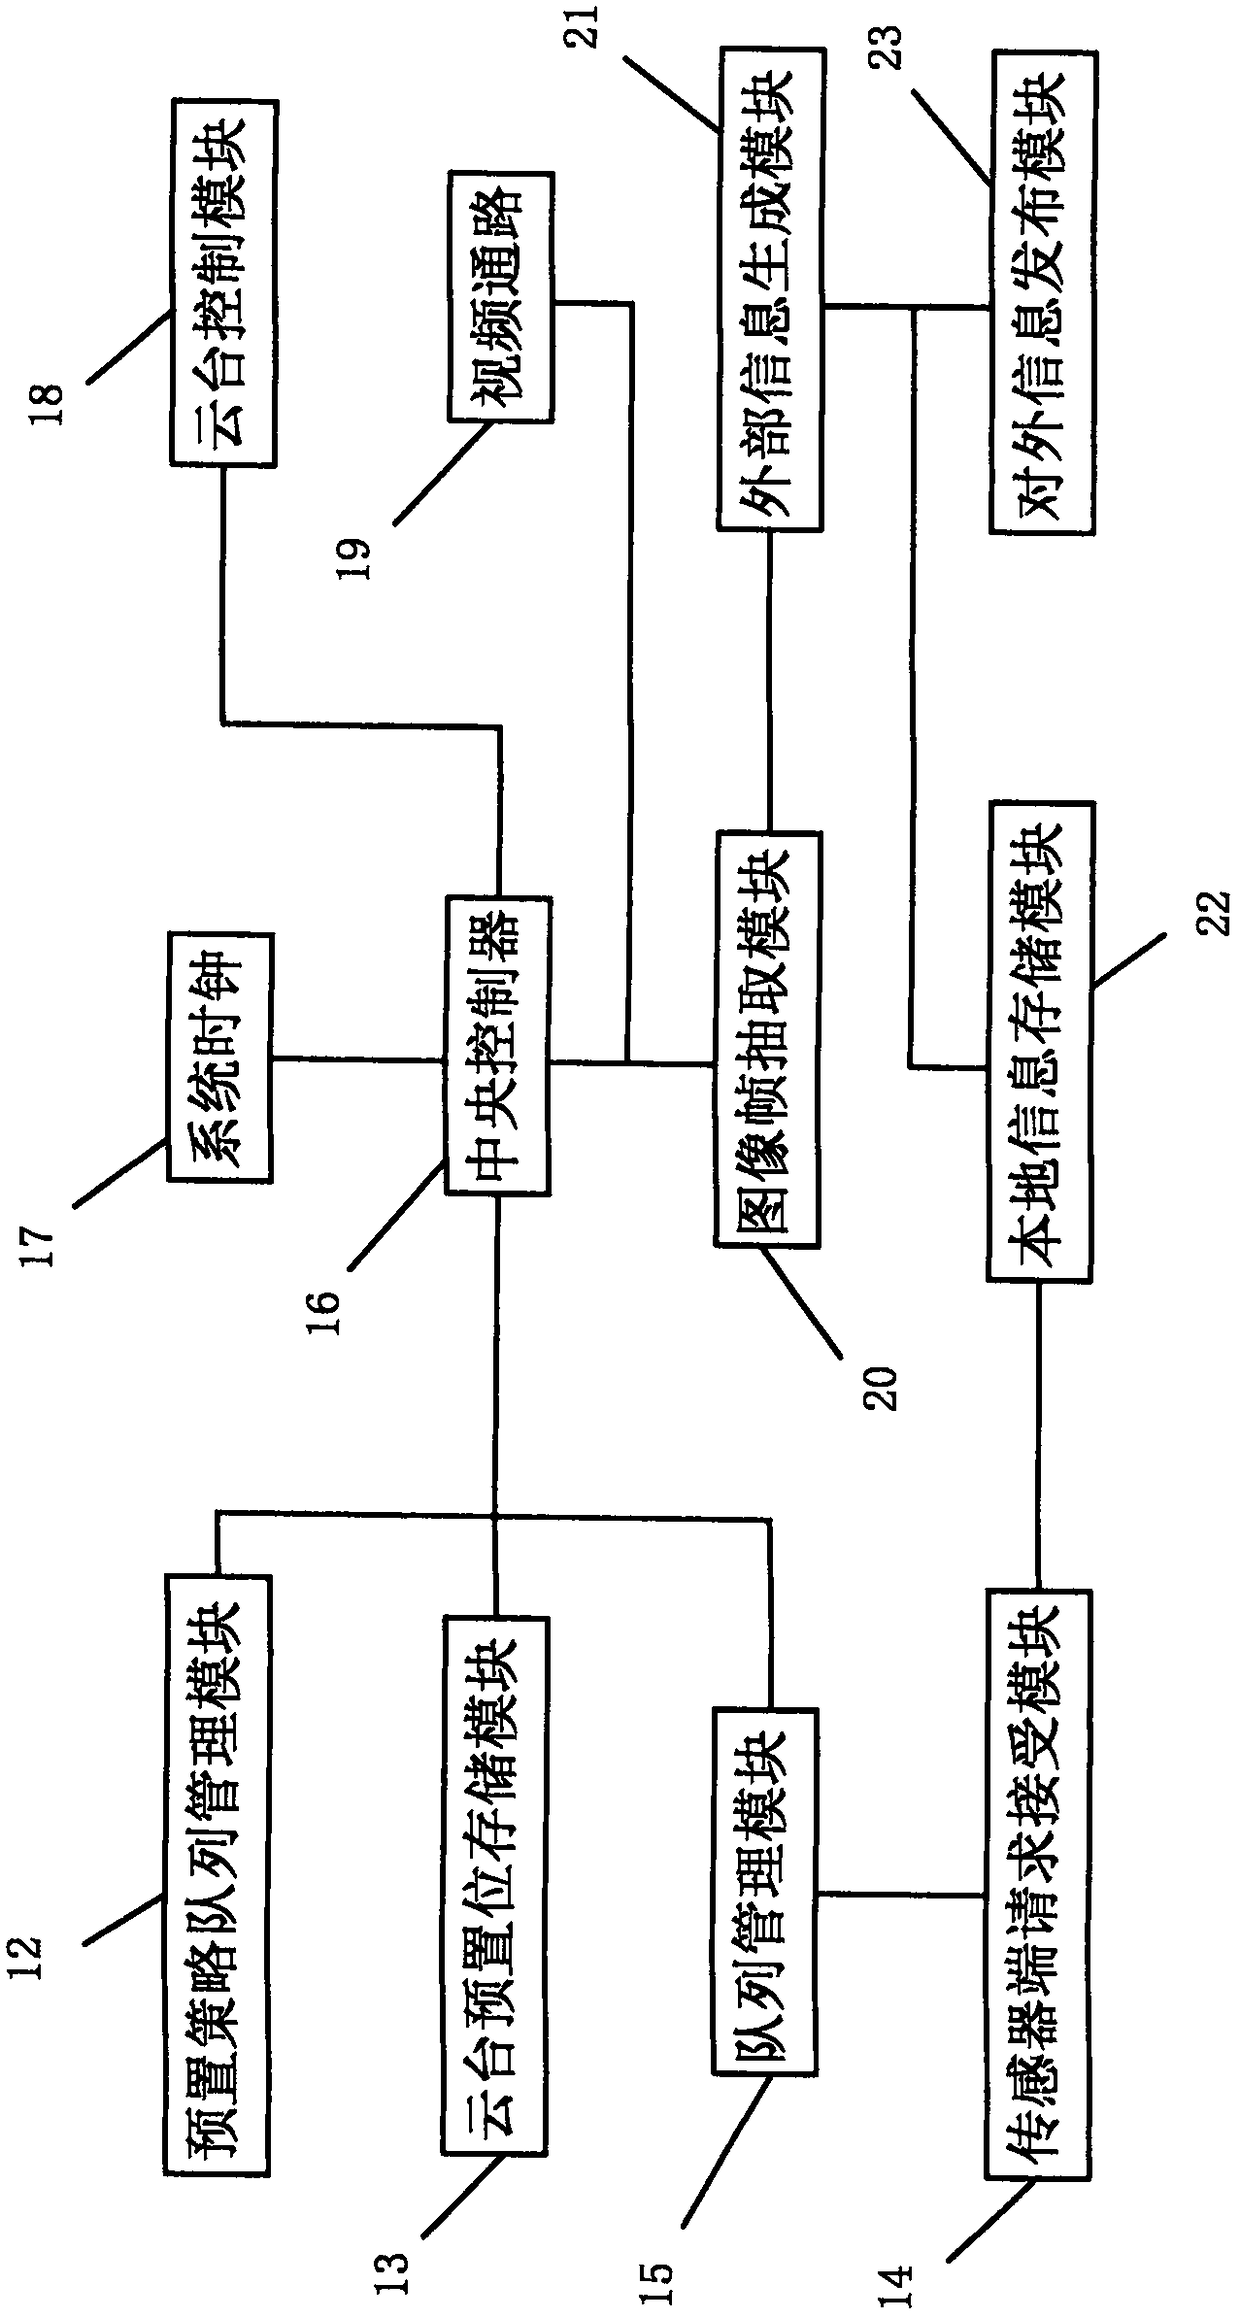 Linkage camera expansion device and method of controlling the same